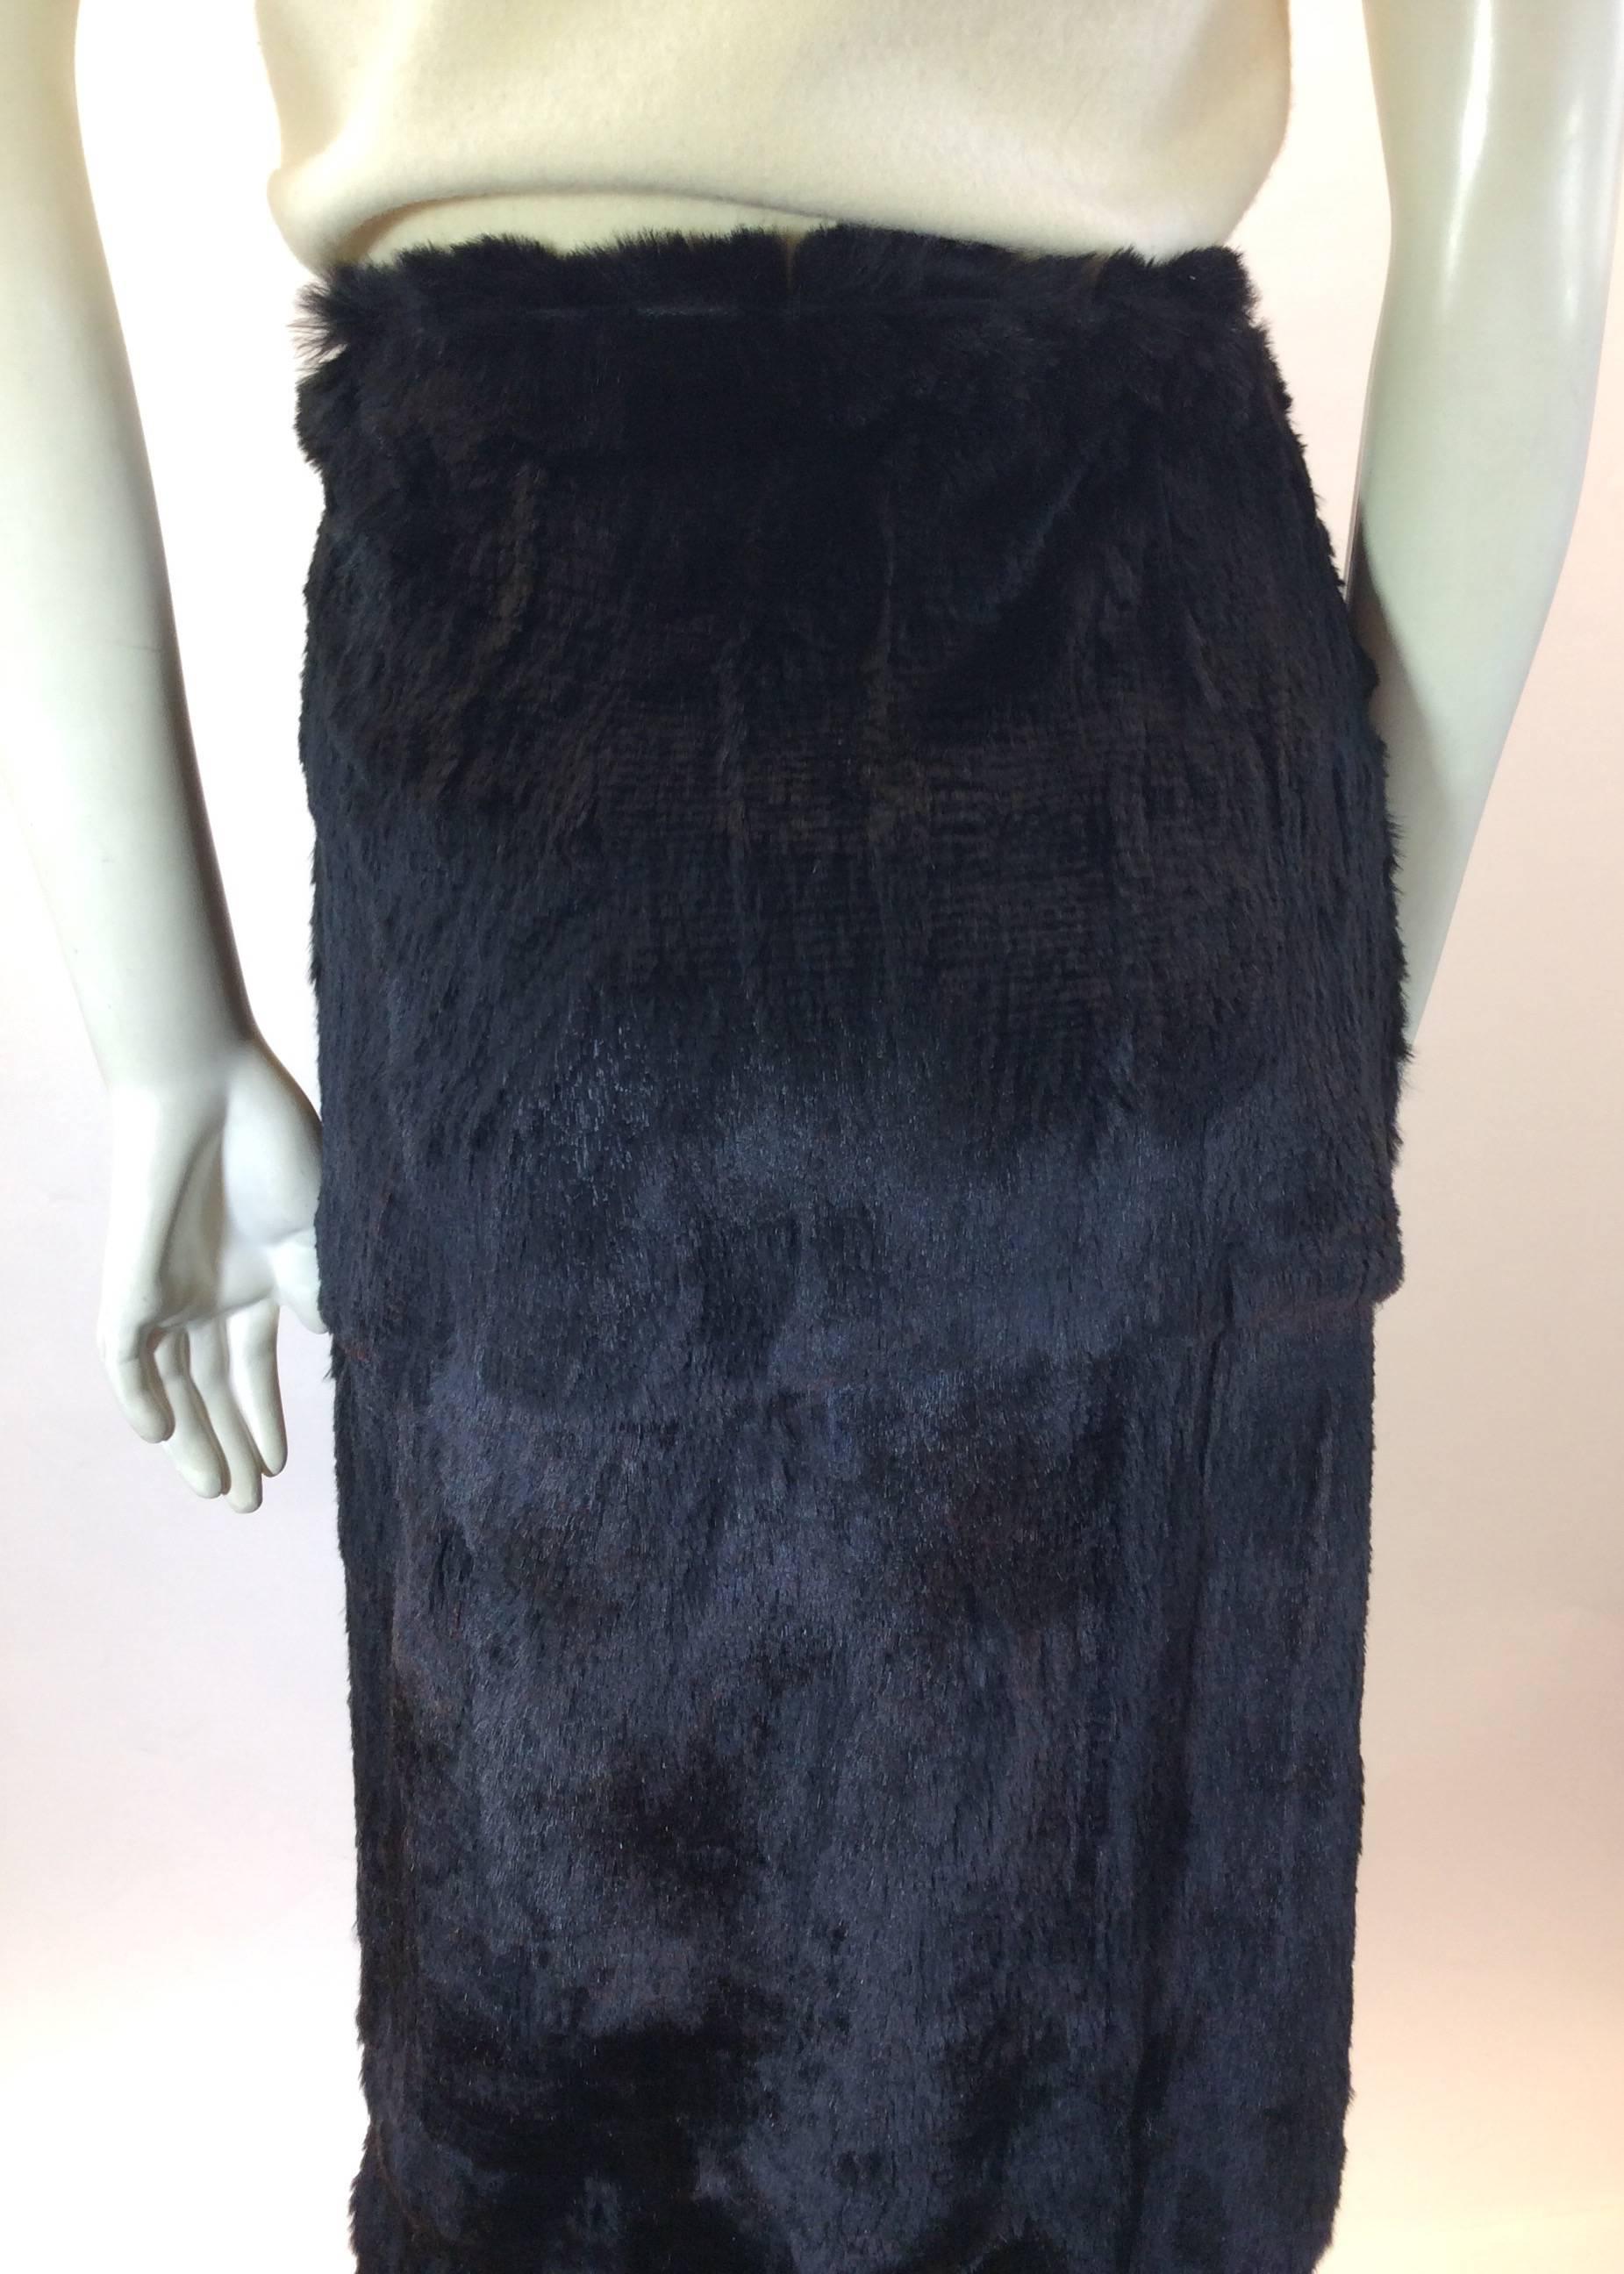 Stephen Sheared Mink Maxi Skirt with Floral Detail In Excellent Condition For Sale In Narberth, PA